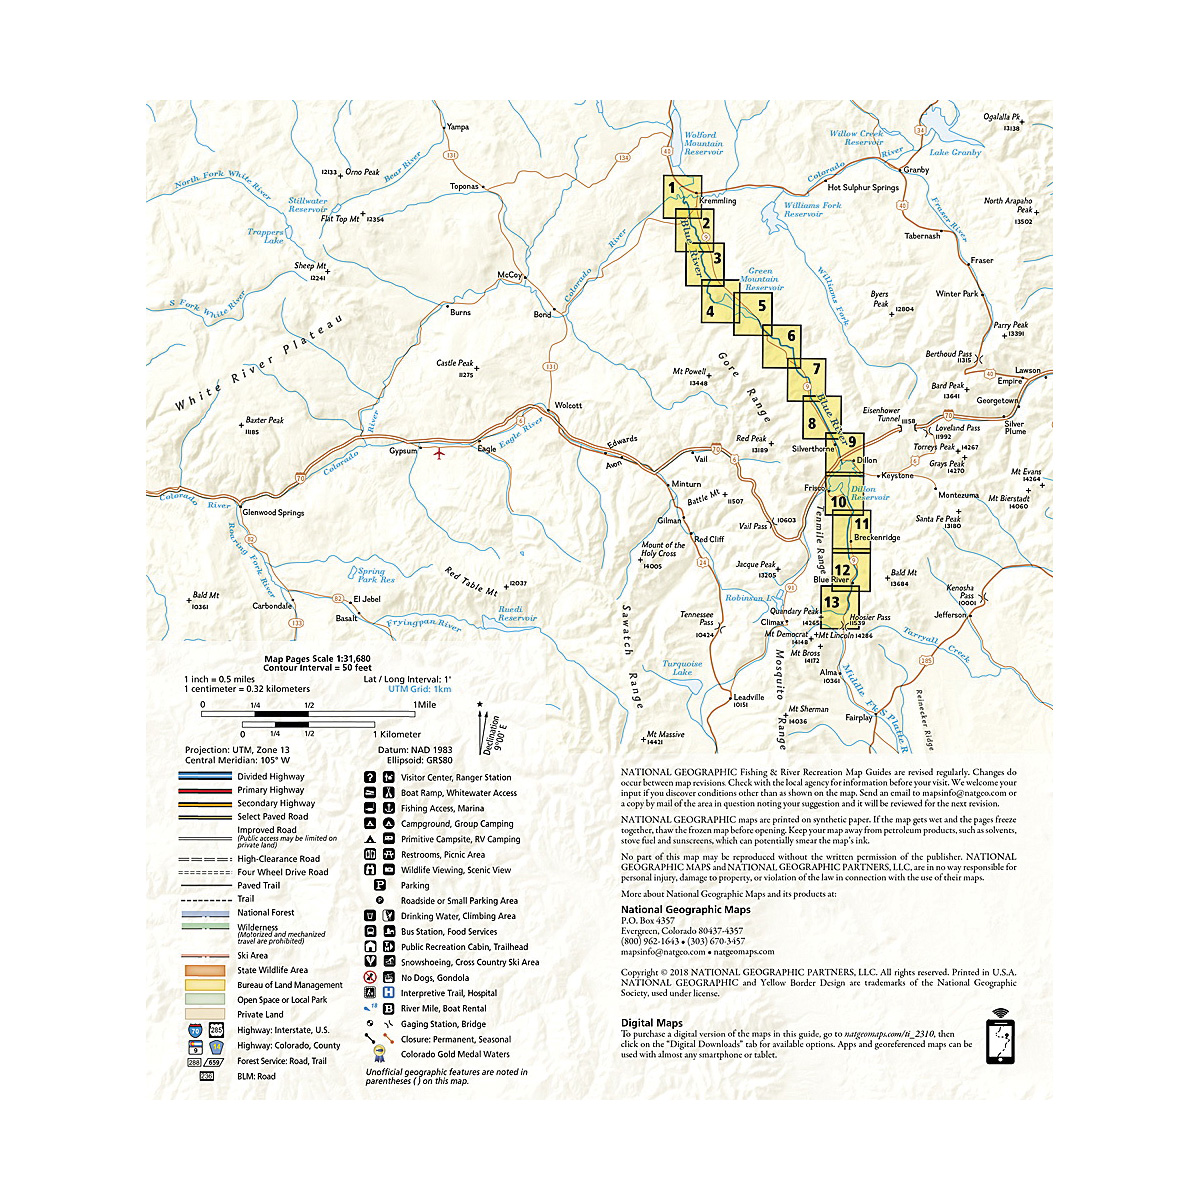 National Geographic TI00002310 Fishing and River Map, Blue River - 2